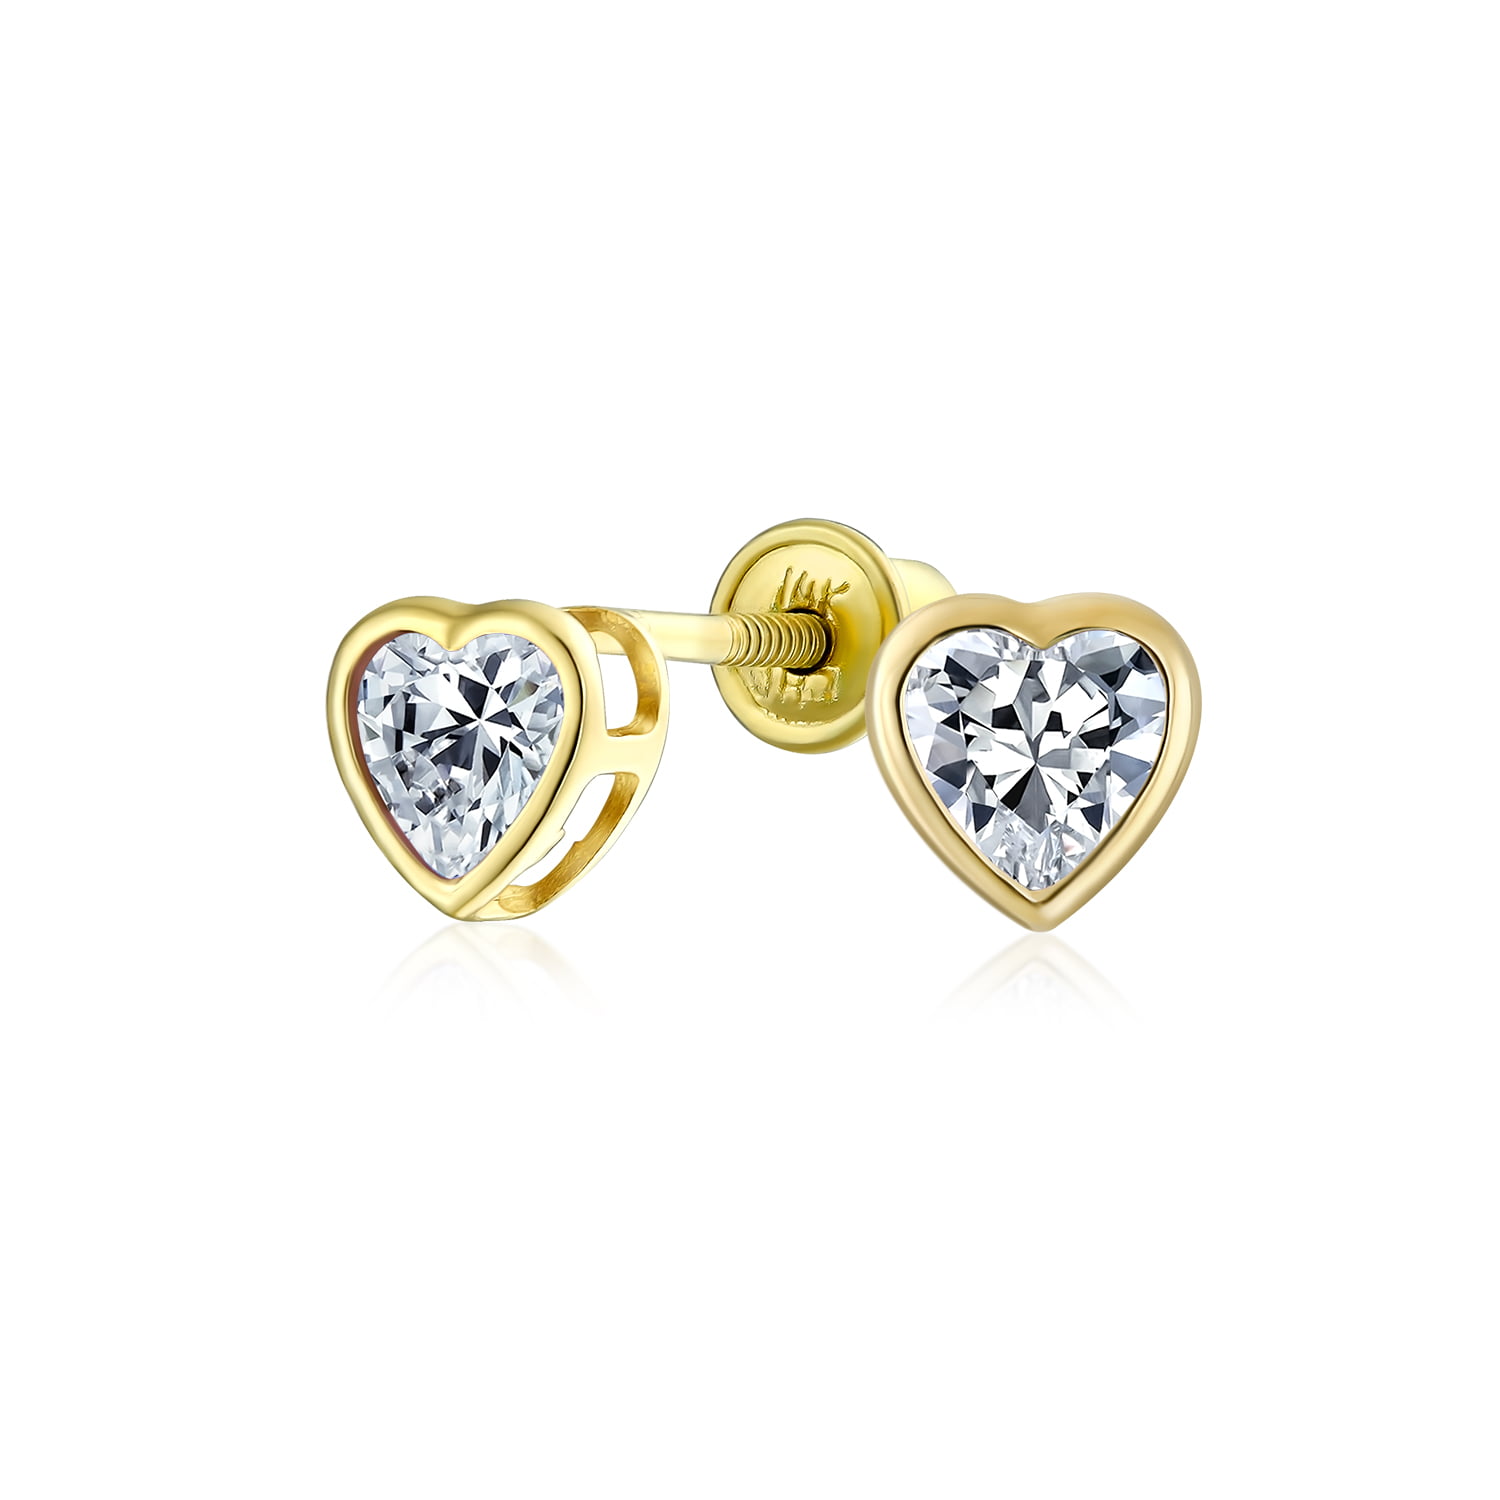 Delicate 14K Yellow Gold Heart with Round cubic zirconia Screwback Stud Earrings Girl Jewelry Gift